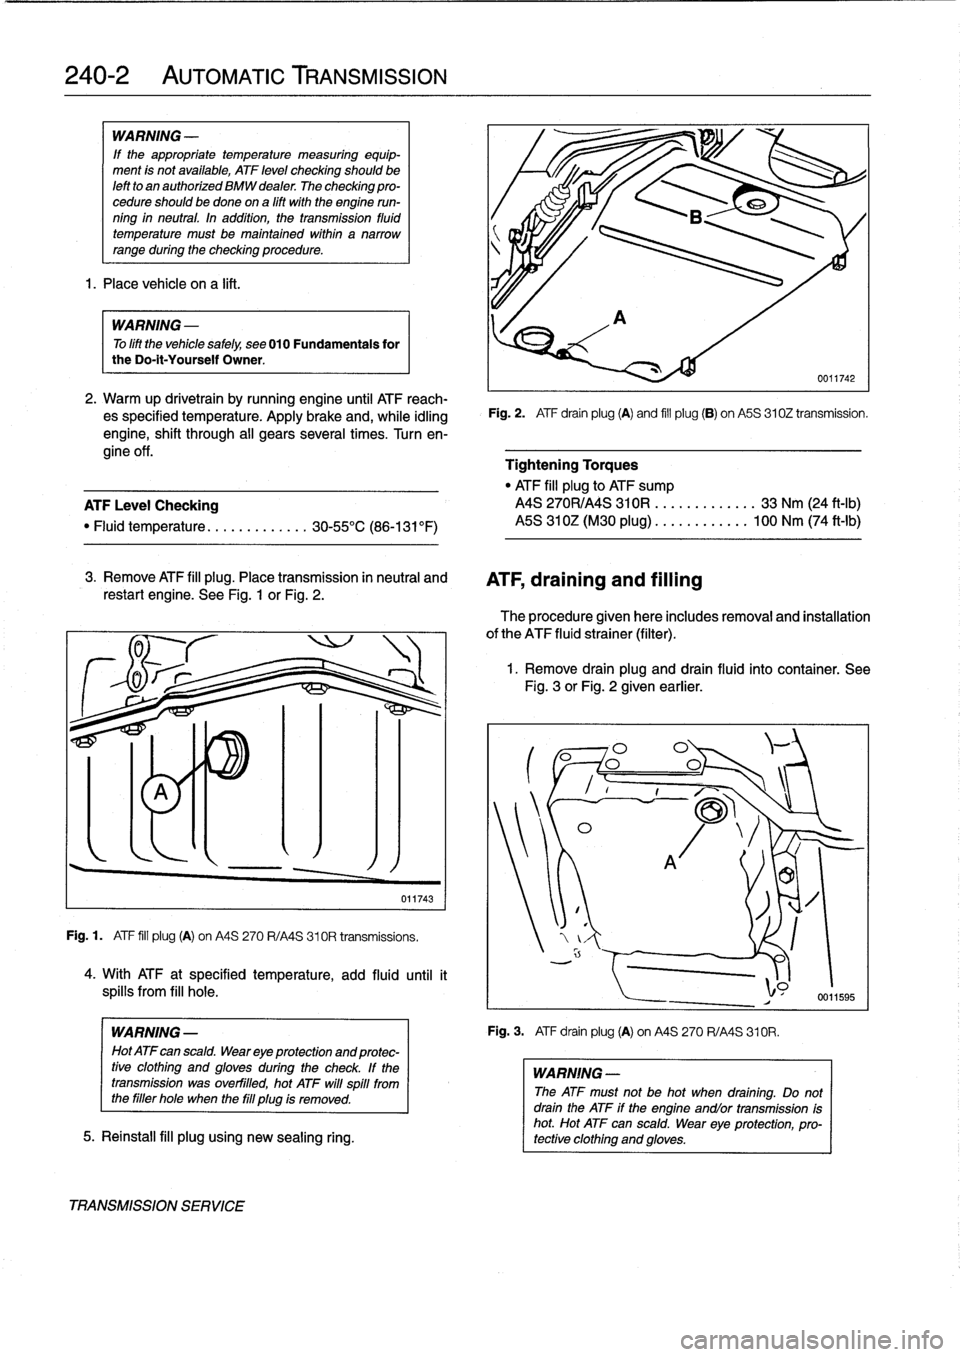 BMW 323i 1993 E36 Owners Manual 
240-2

	

AUTOMATIC
TRANSMISSION

WARNING
-

If
the
appropriate
temperature
measuring
equip-
ment
is
not
available,
ATF
leve¡
checking
shouldbe
left
to
an
authorized
BMW
dealer
The
checking
pro-
ced